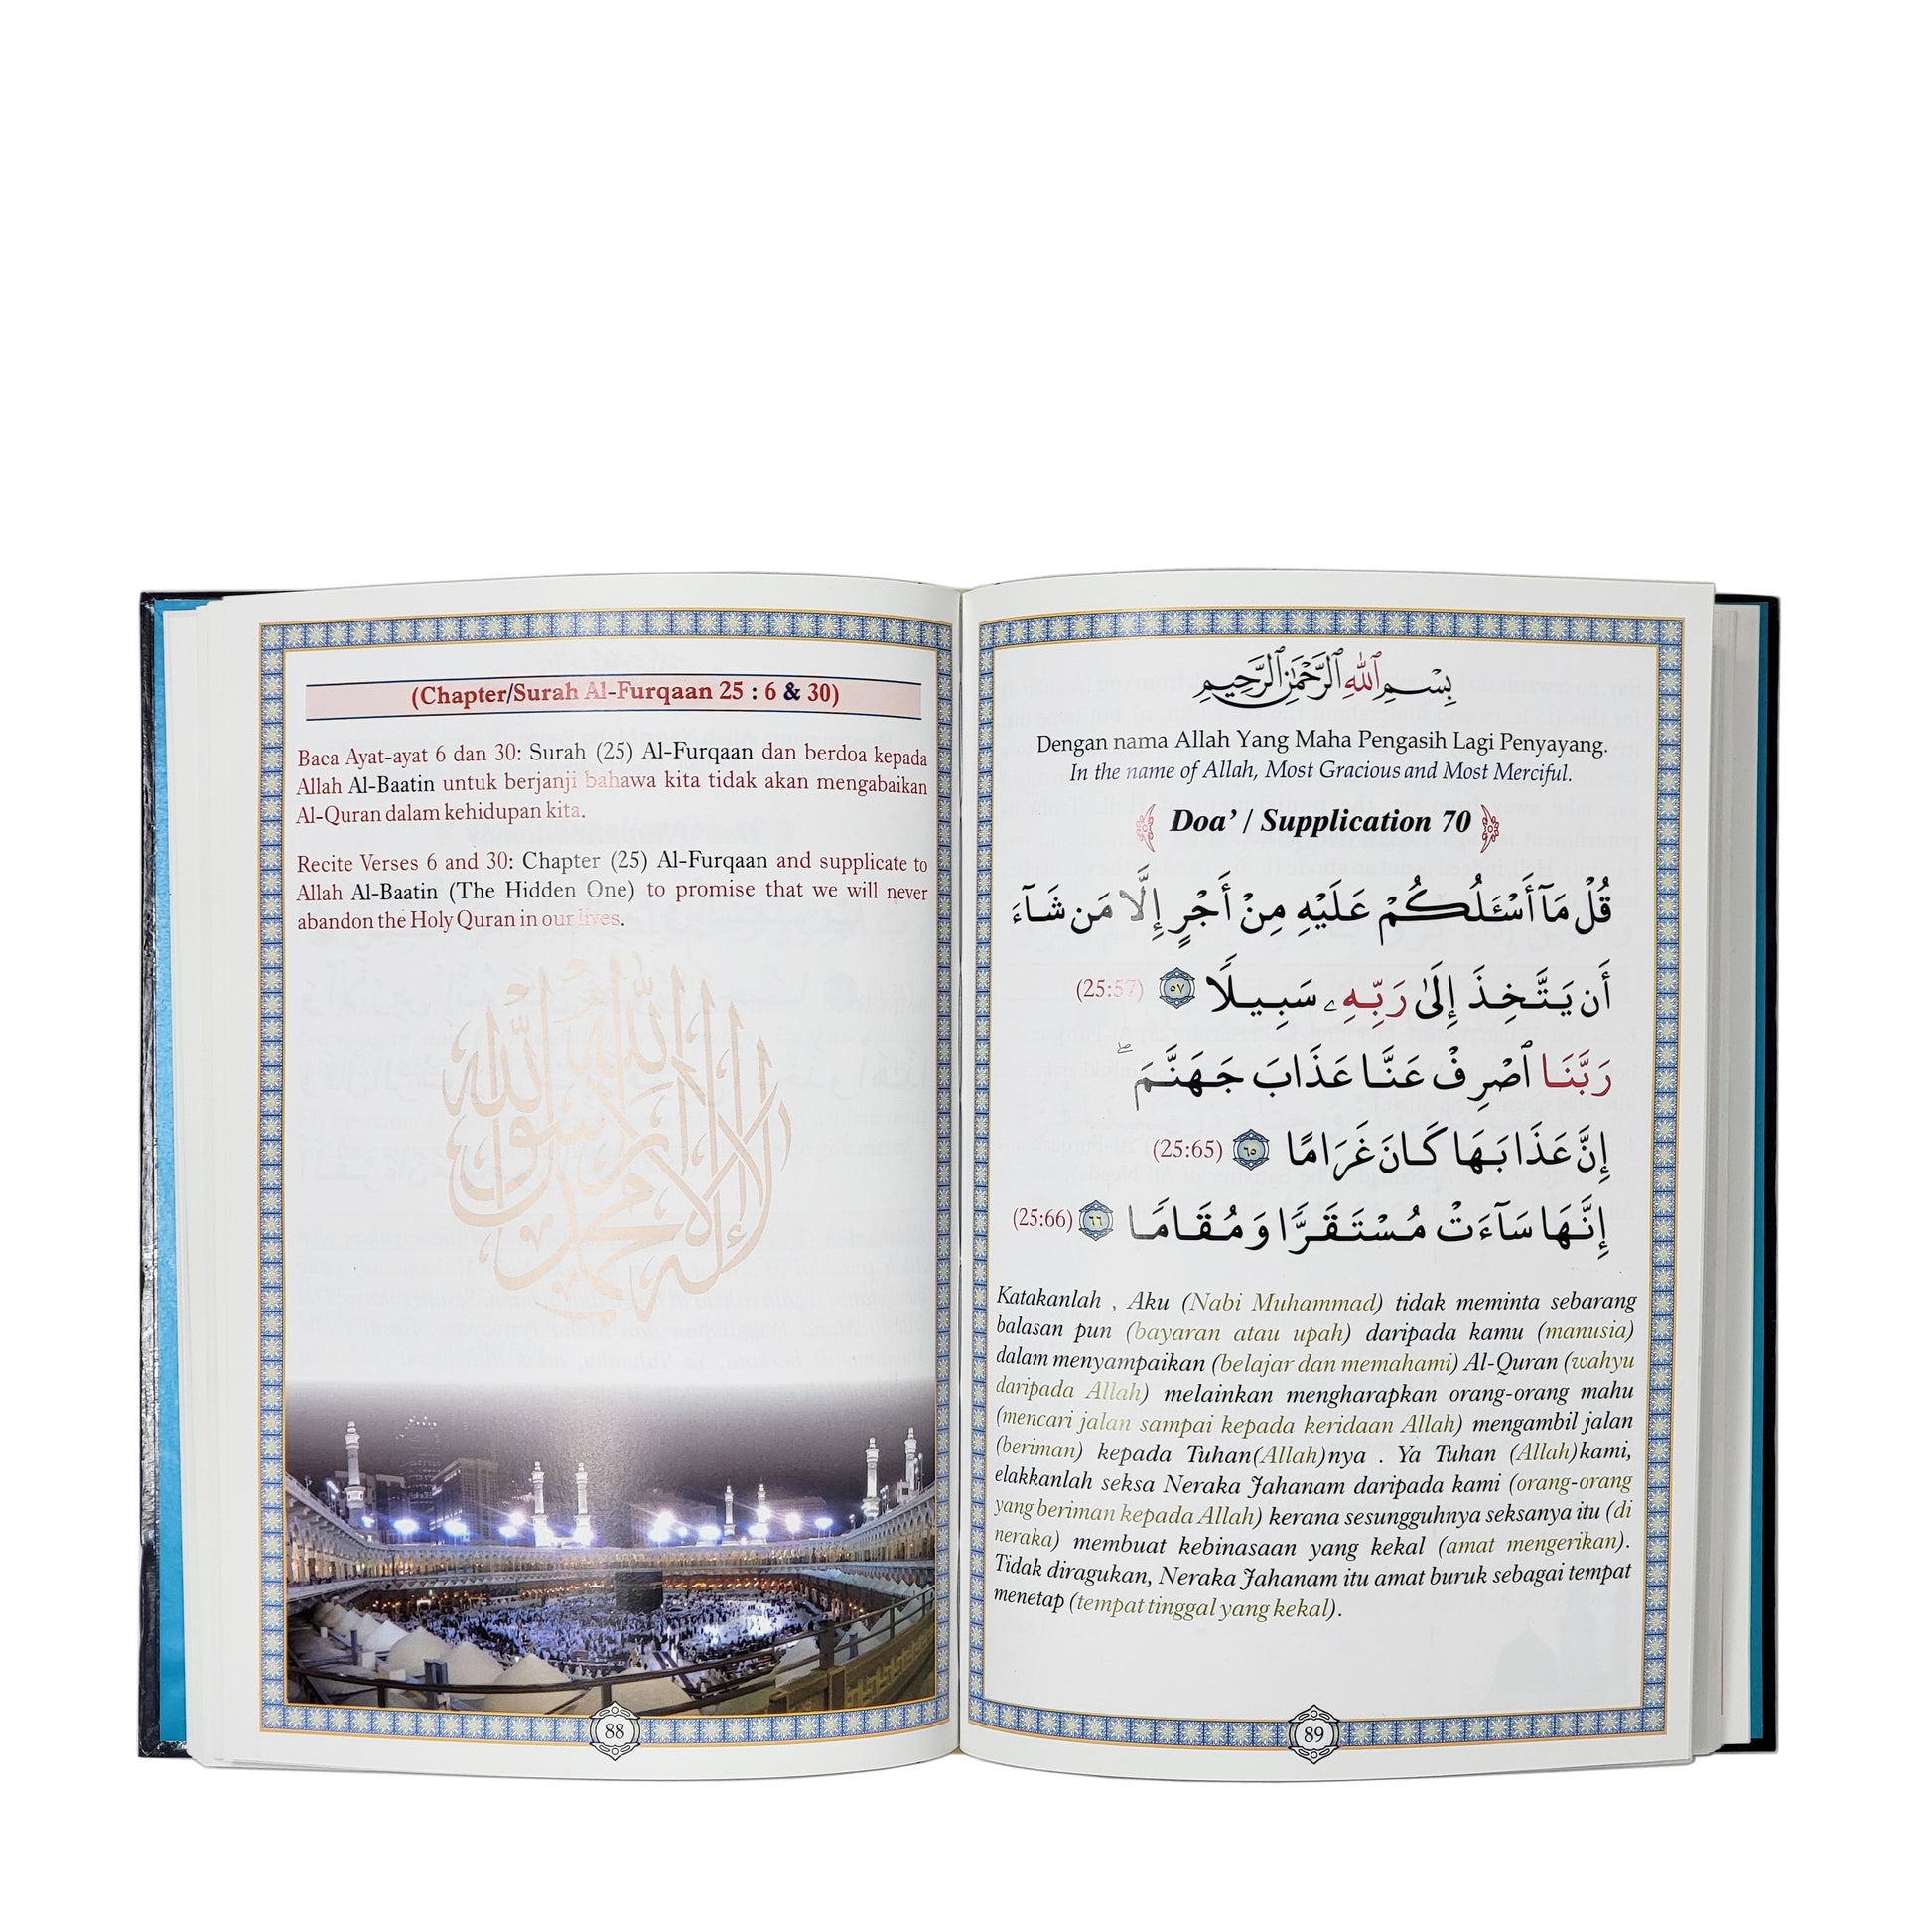 Supplications from the Holy Quran